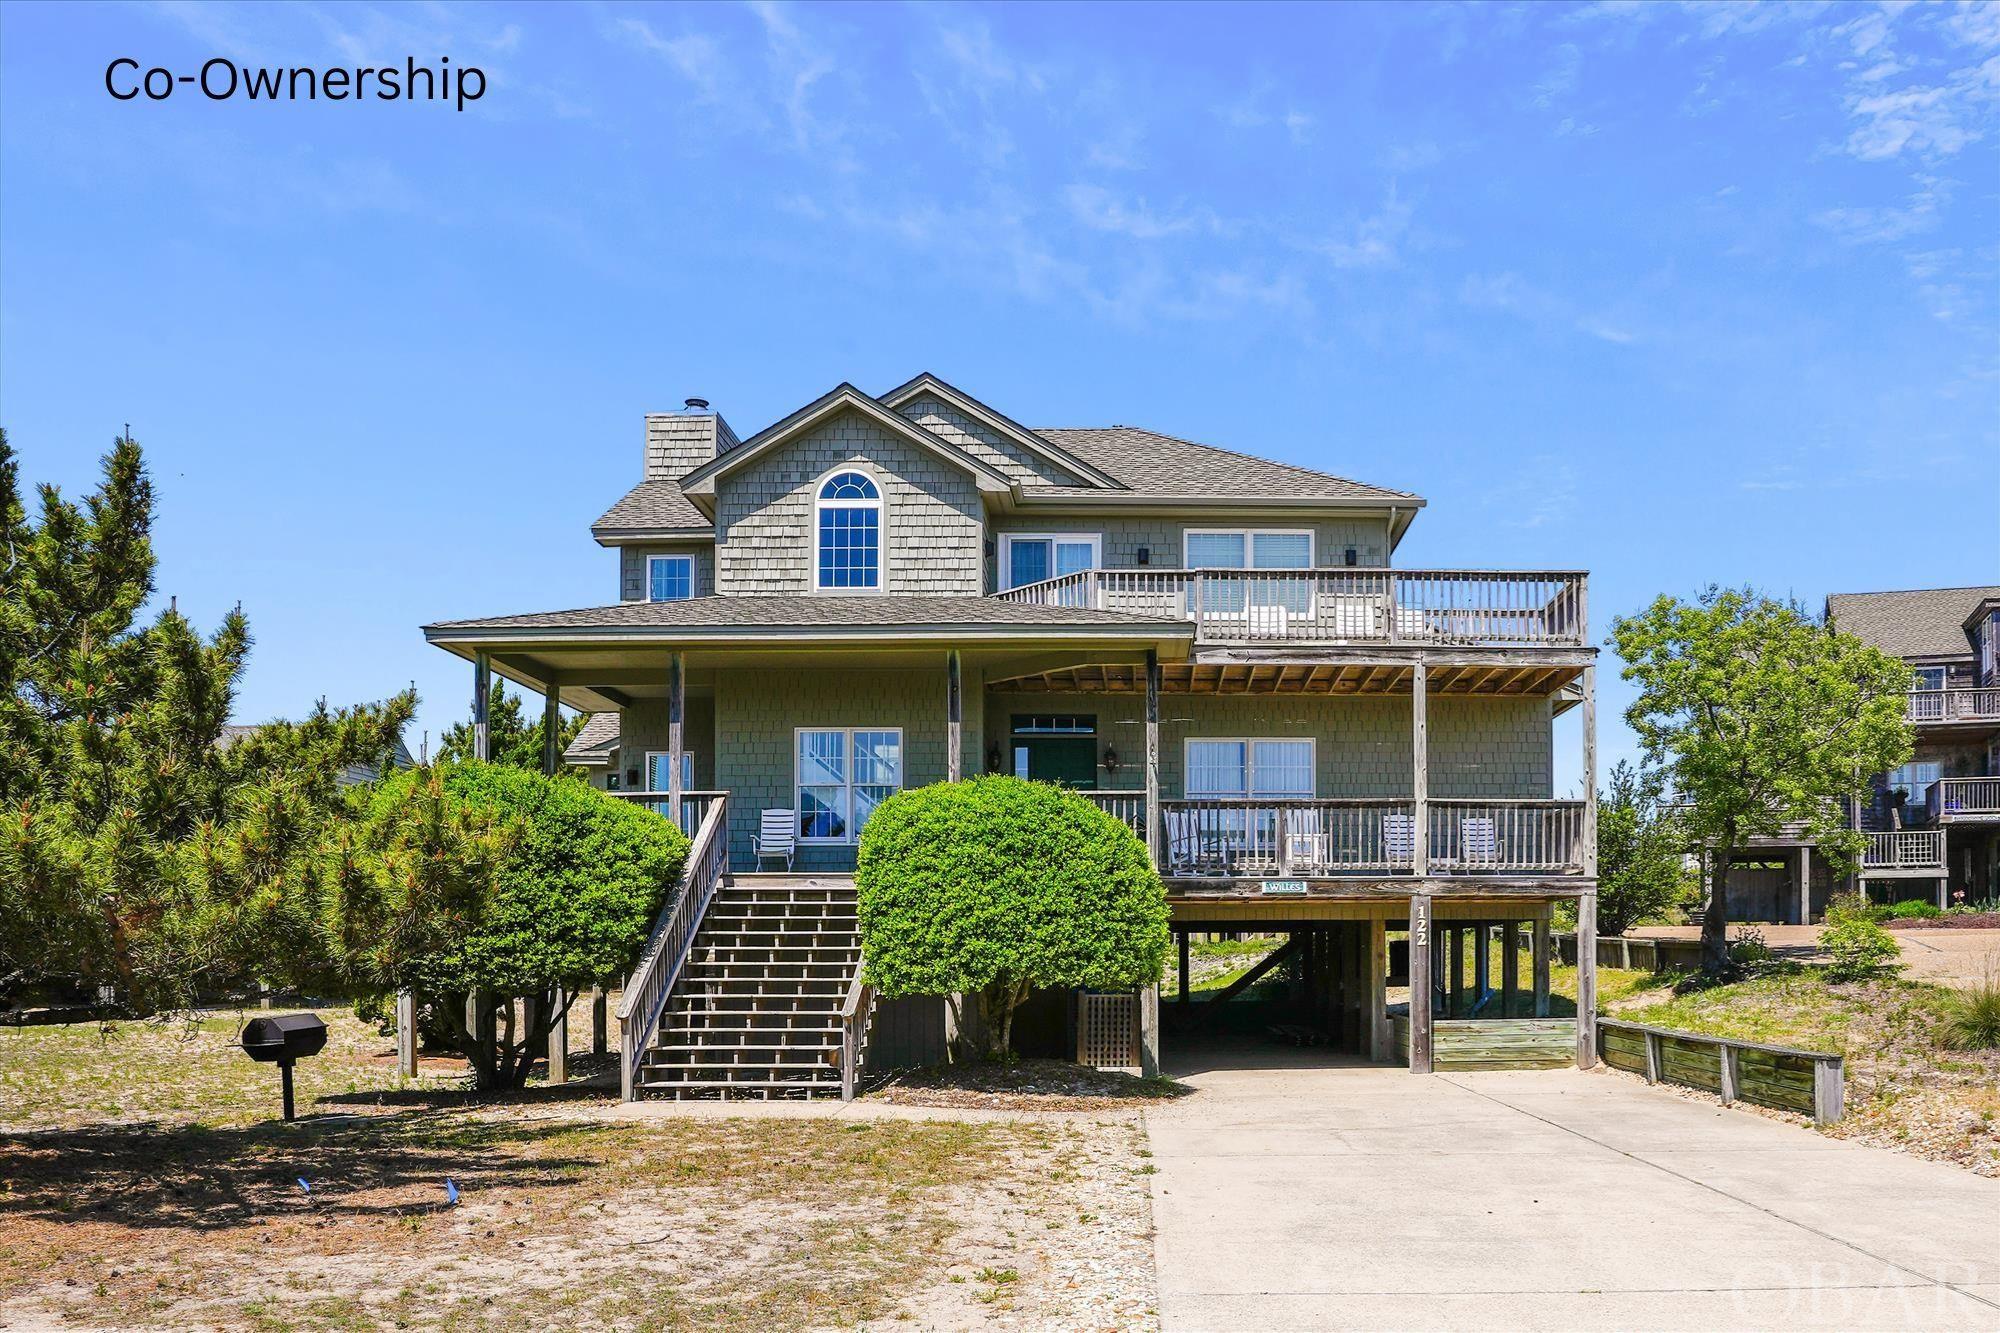 122 Ships Watch Drive, Duck, NC 27949, 4 Bedrooms Bedrooms, ,3 BathroomsBathrooms,Residential,For Sale,Ships Watch Drive,124491